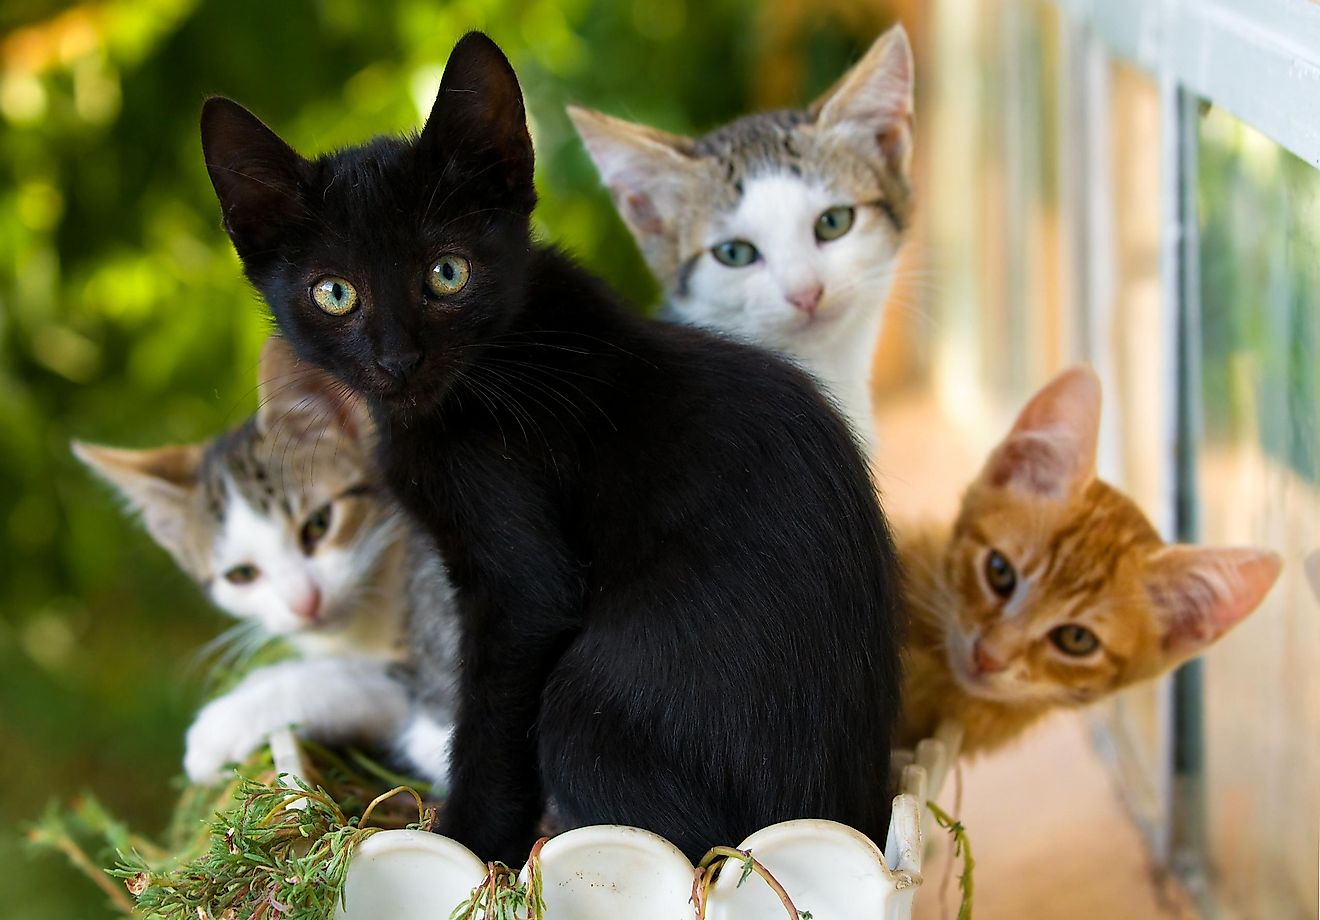 Cats are Europe's most popular pets.